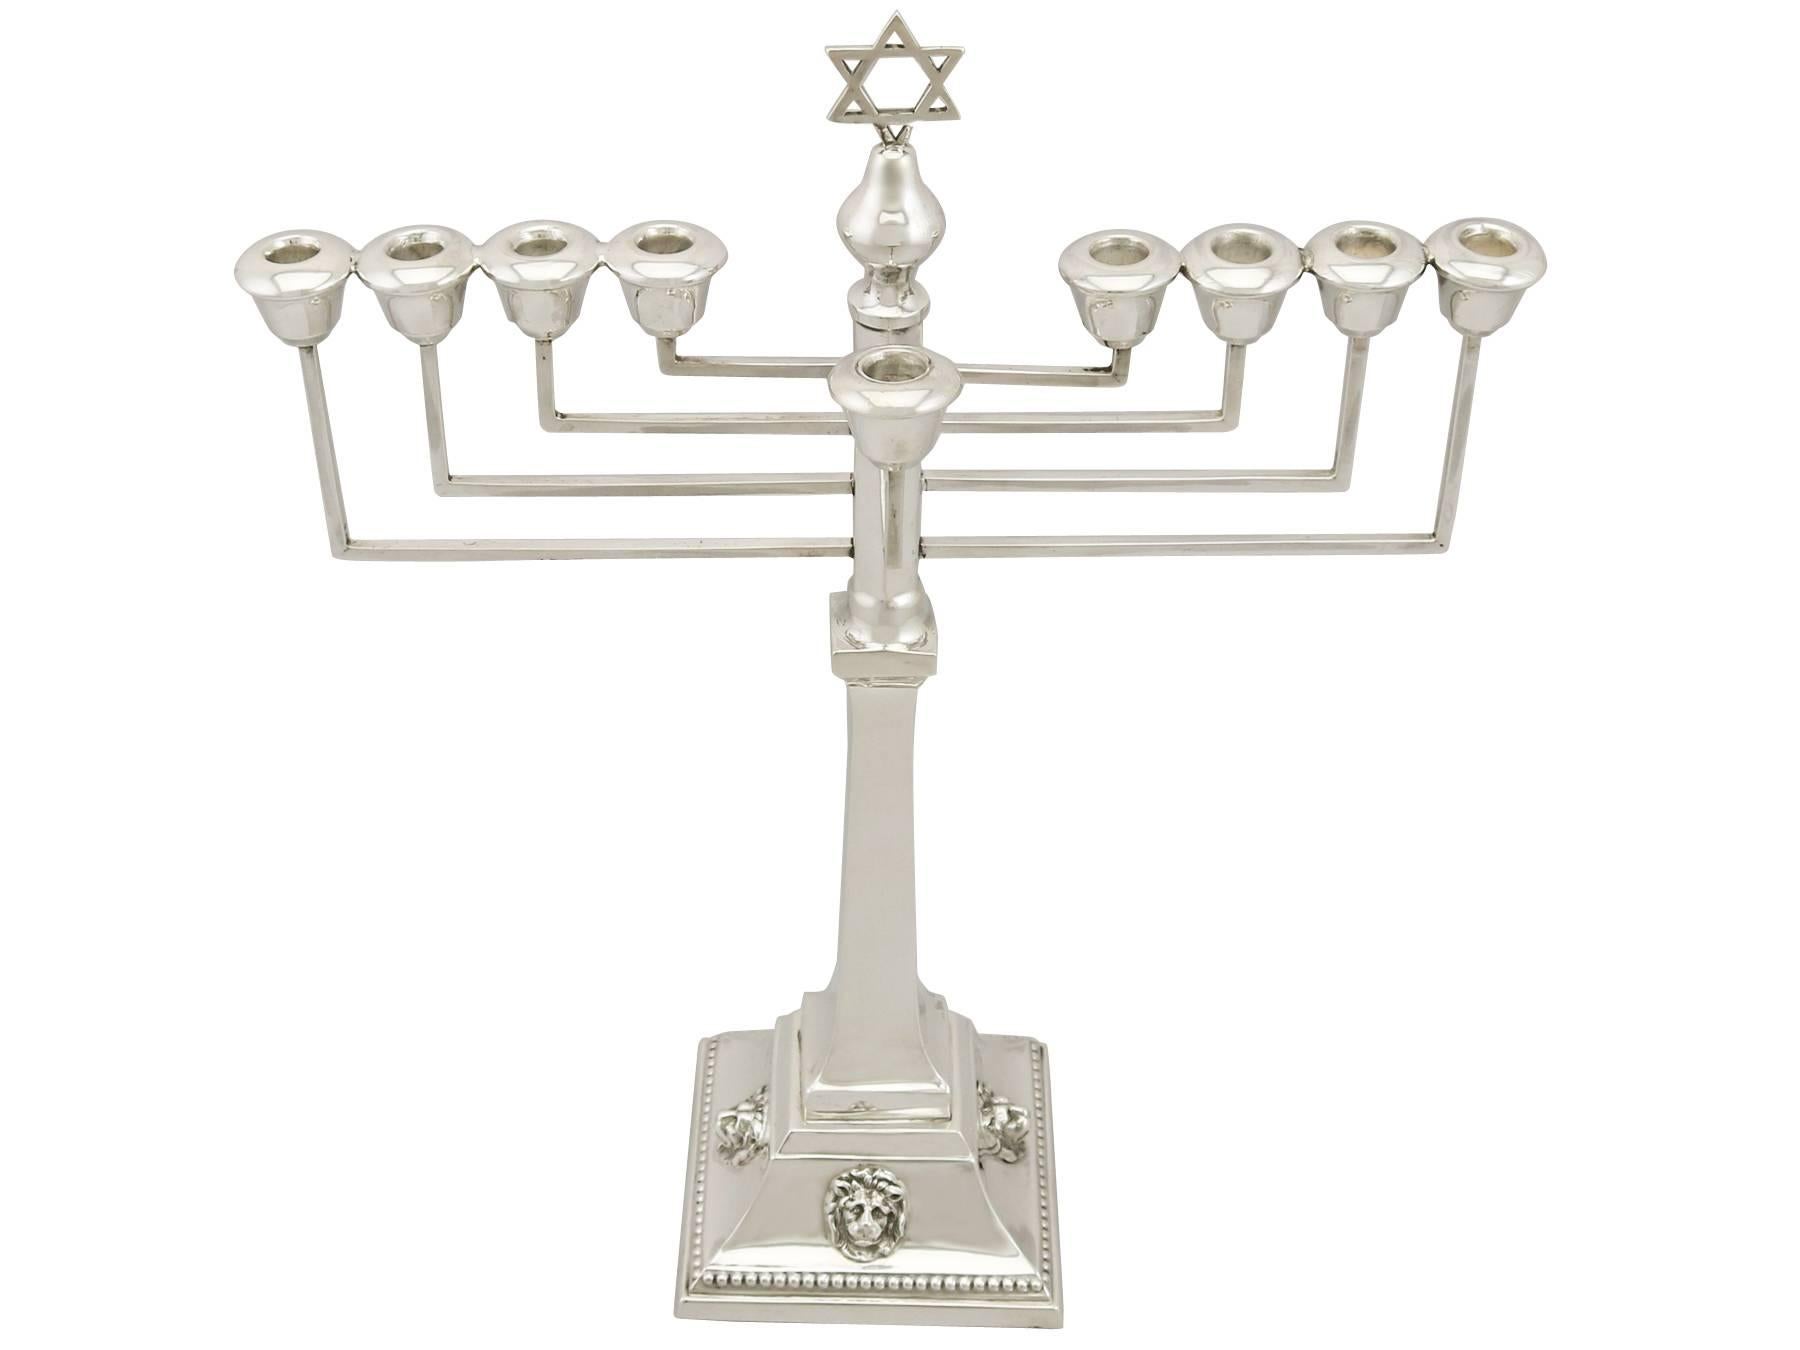 
An exceptional, fine and impressive antique George V English sterling silver Hanukkiah made by A Taite & Sons Ltd; an addition to our ornamental silverware collection

This exceptional antique sterling silver Hanukkiah* has plain circular